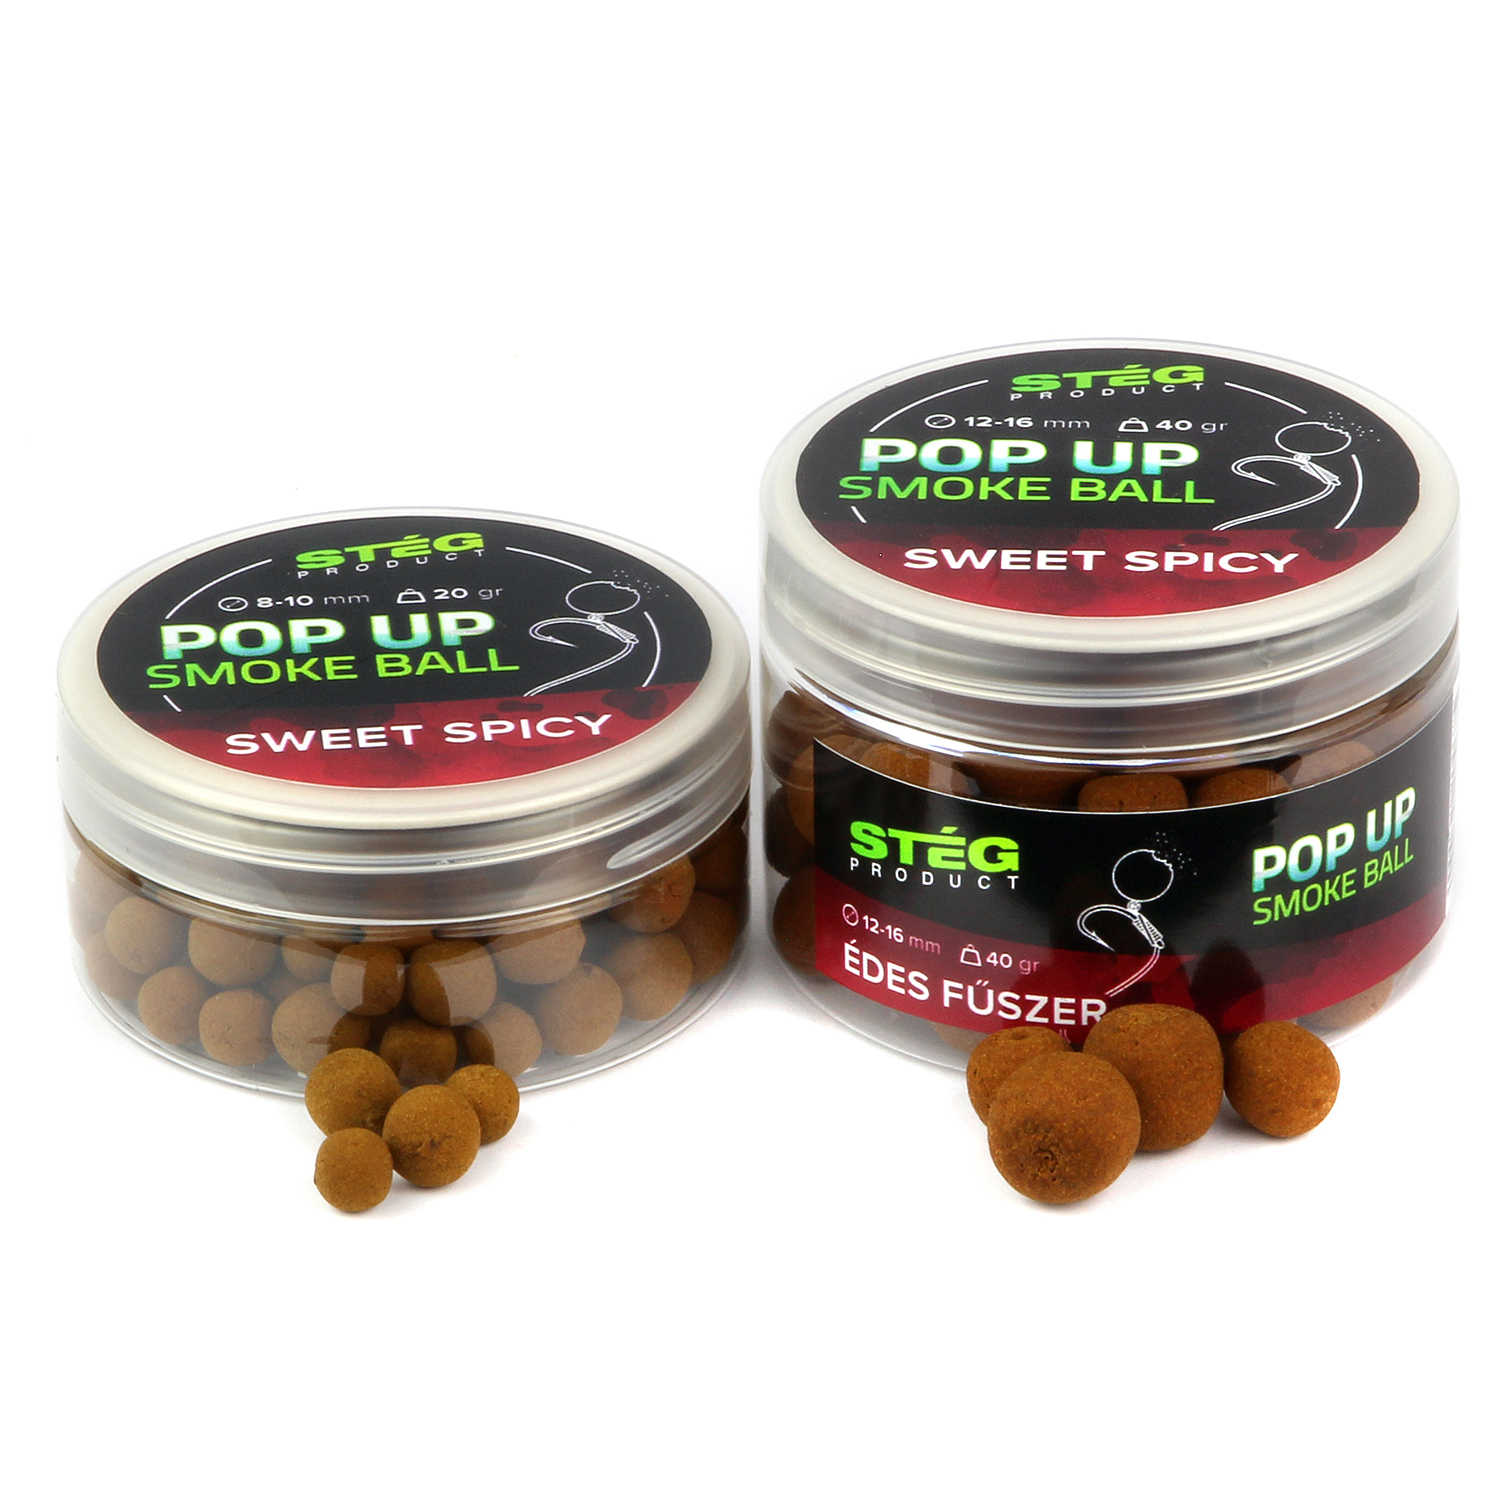 Stg Product Pop Up Smoke Ball 12-16 mm SWEET SPICY 40g